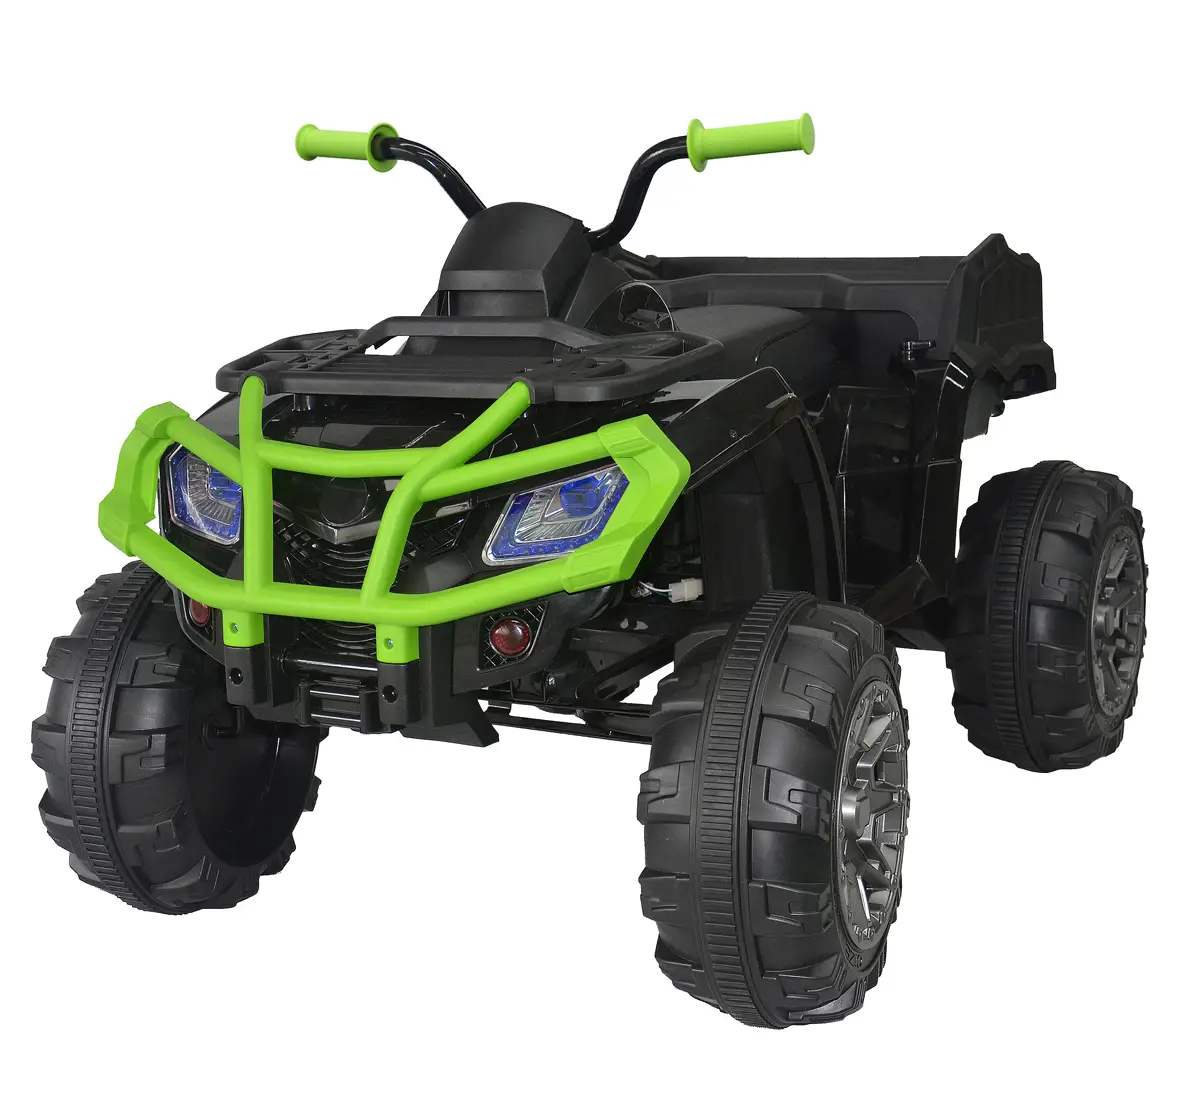 Bettyma ATV RC Buggy 2.5Ghz - Battery Operated Rideons for Kids, 3Y ...